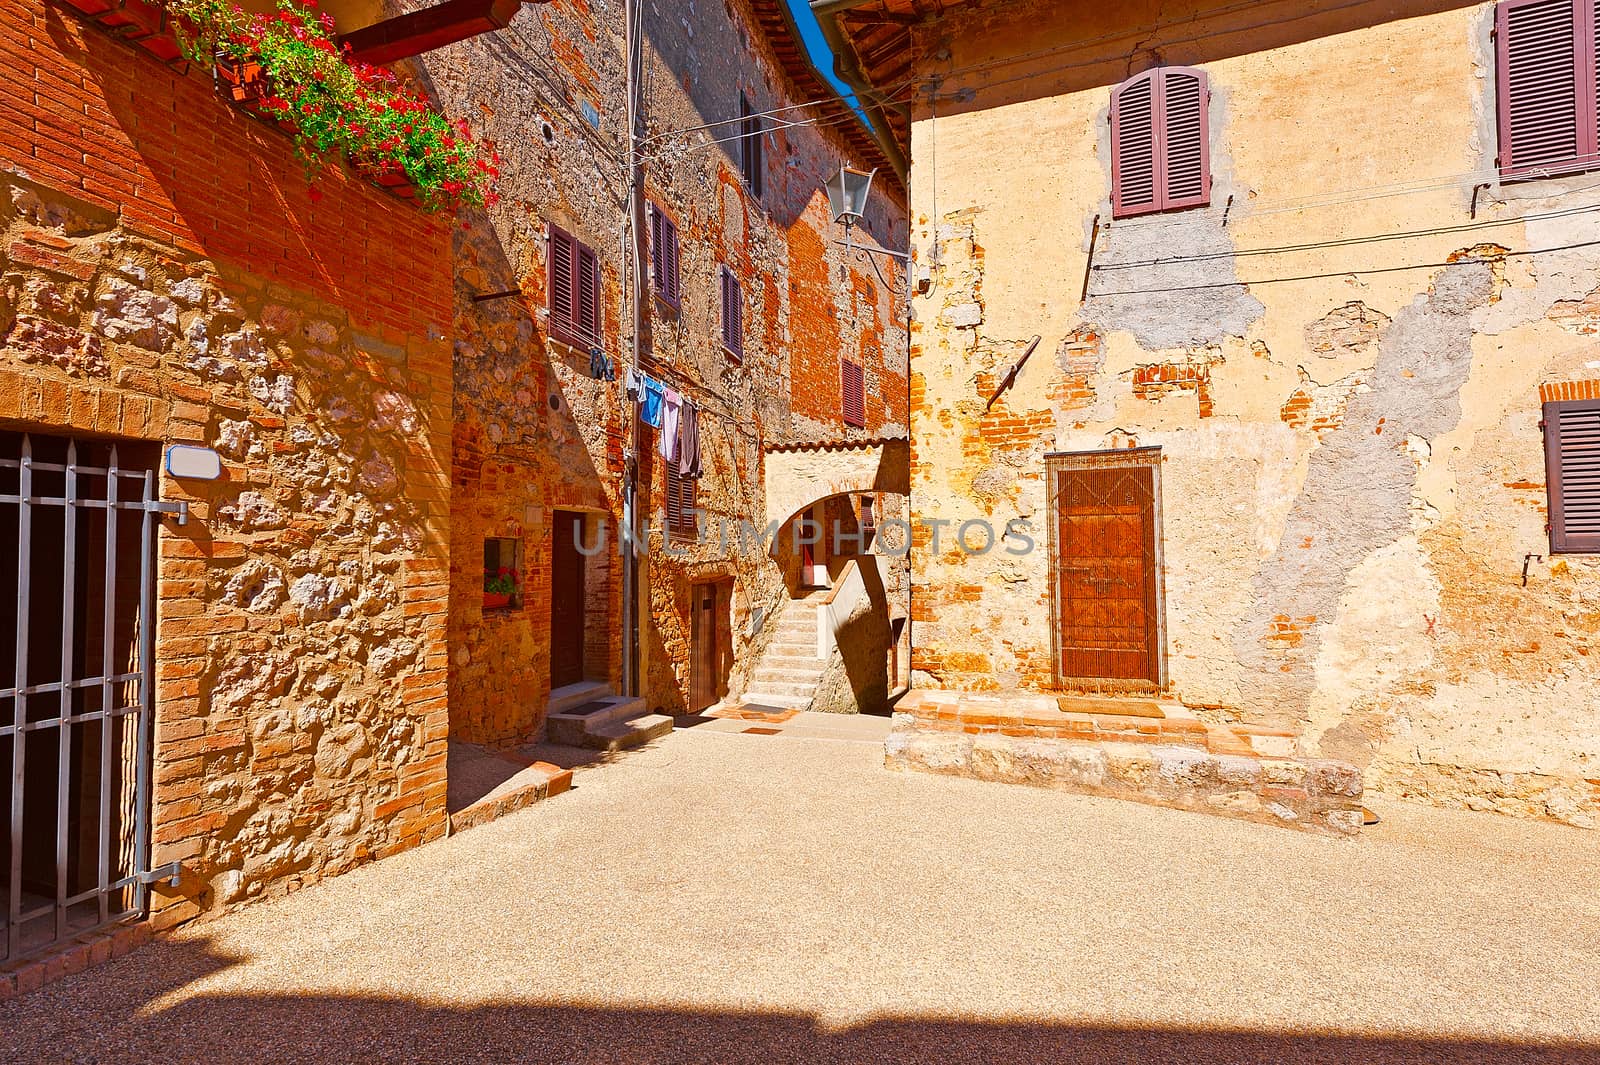 Narrow Street with Old Buildings in Italian City